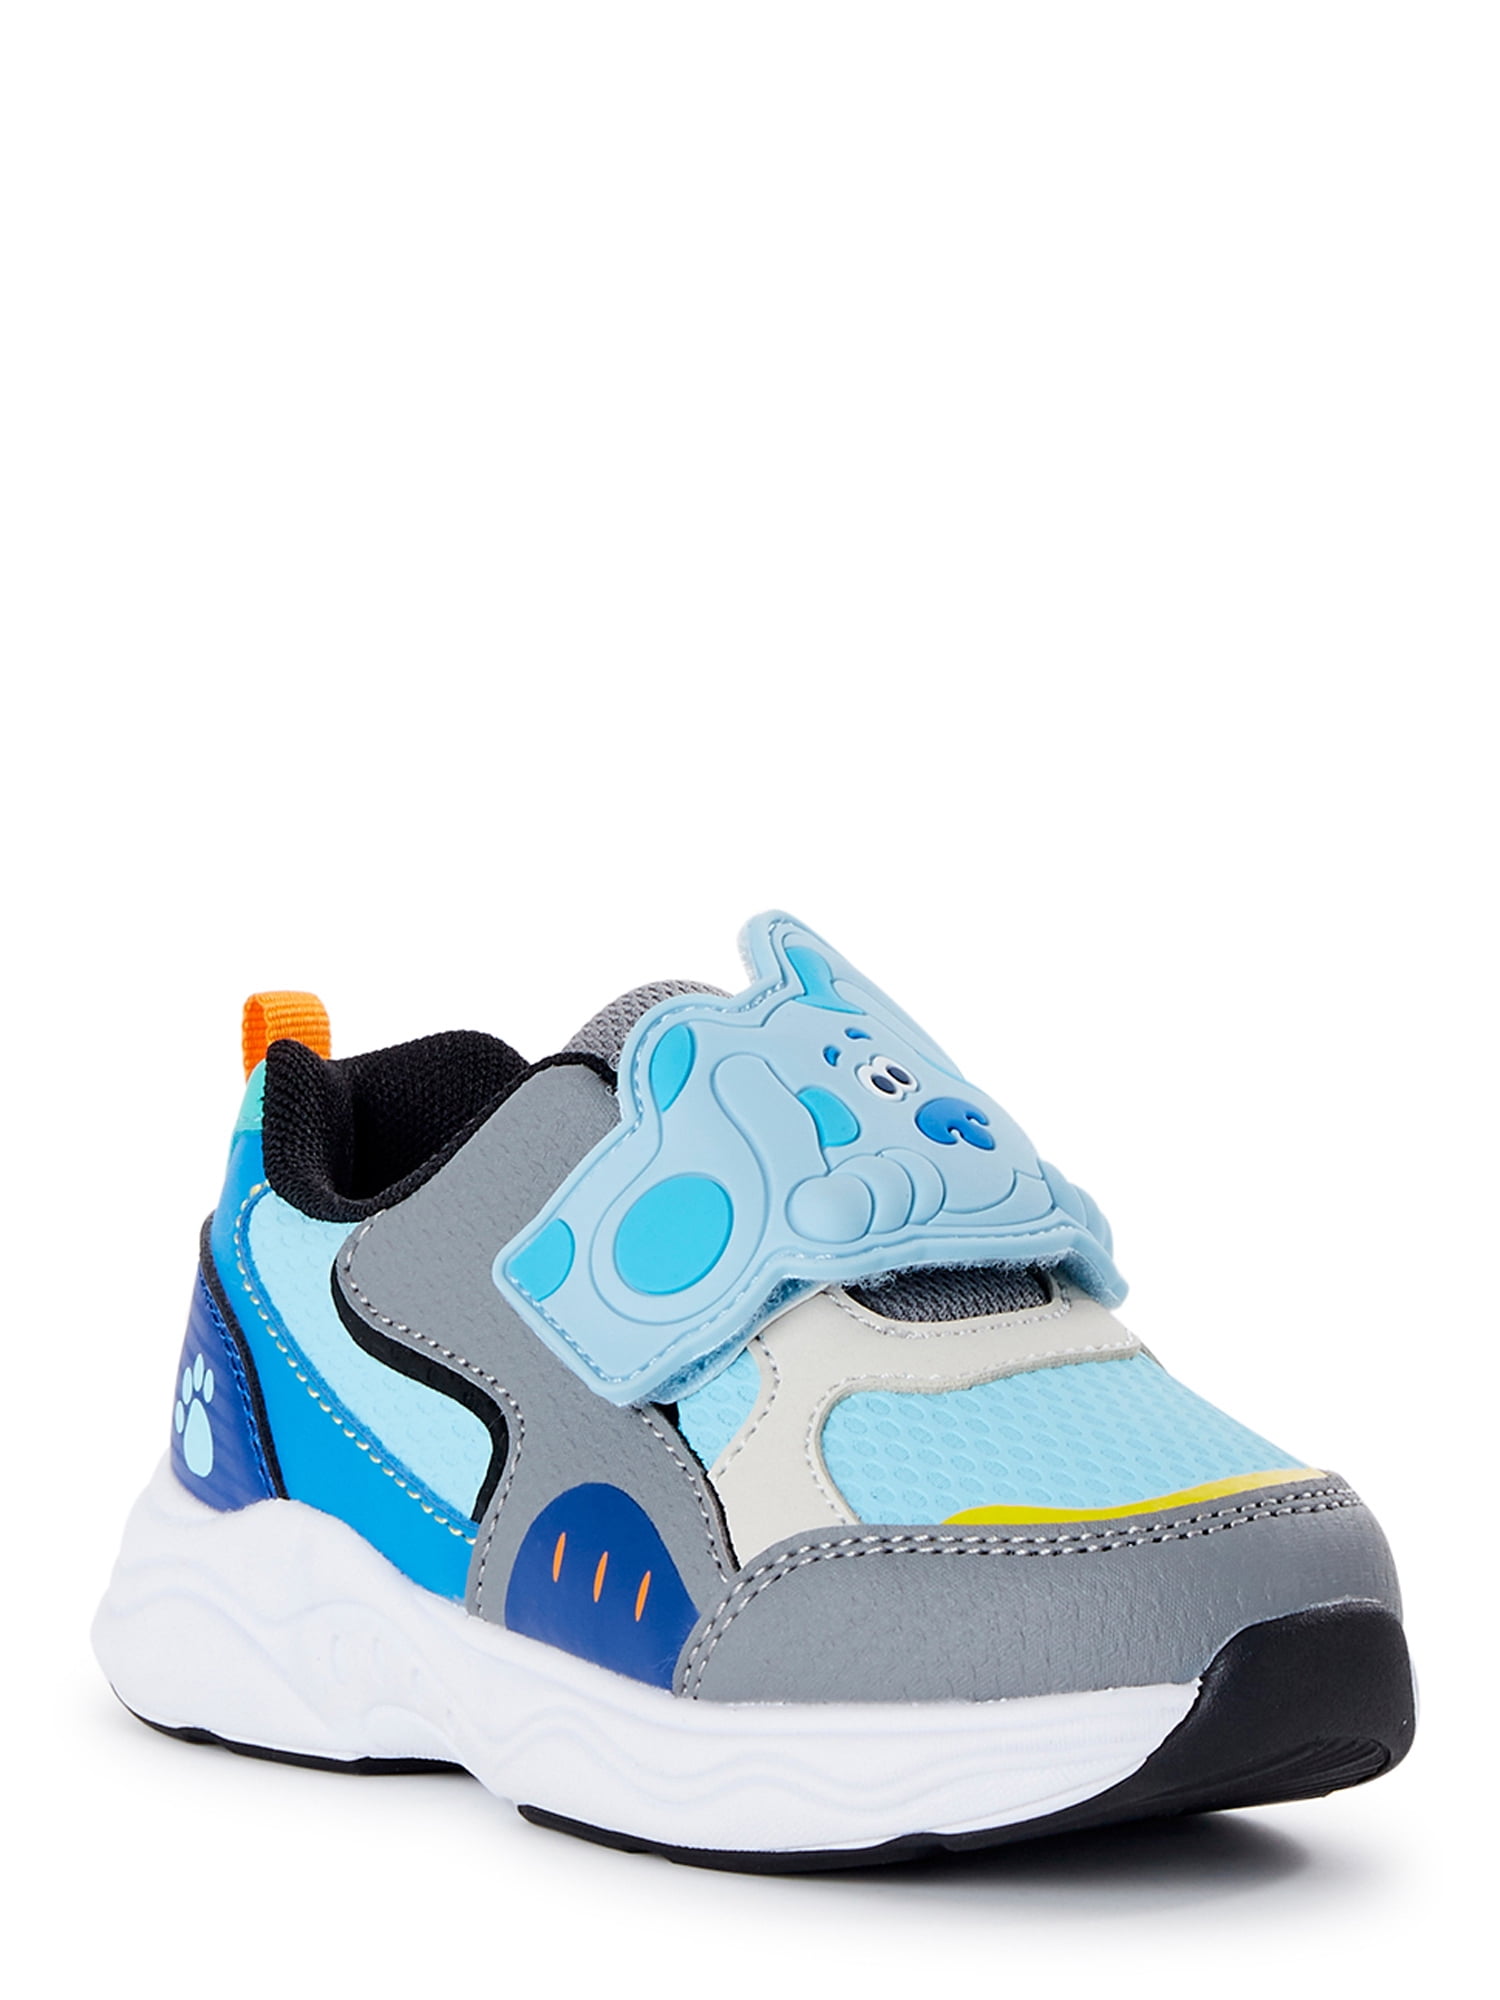 Blue's Clues Toddler Boys Athletic Sneakers, Sizes 5-11